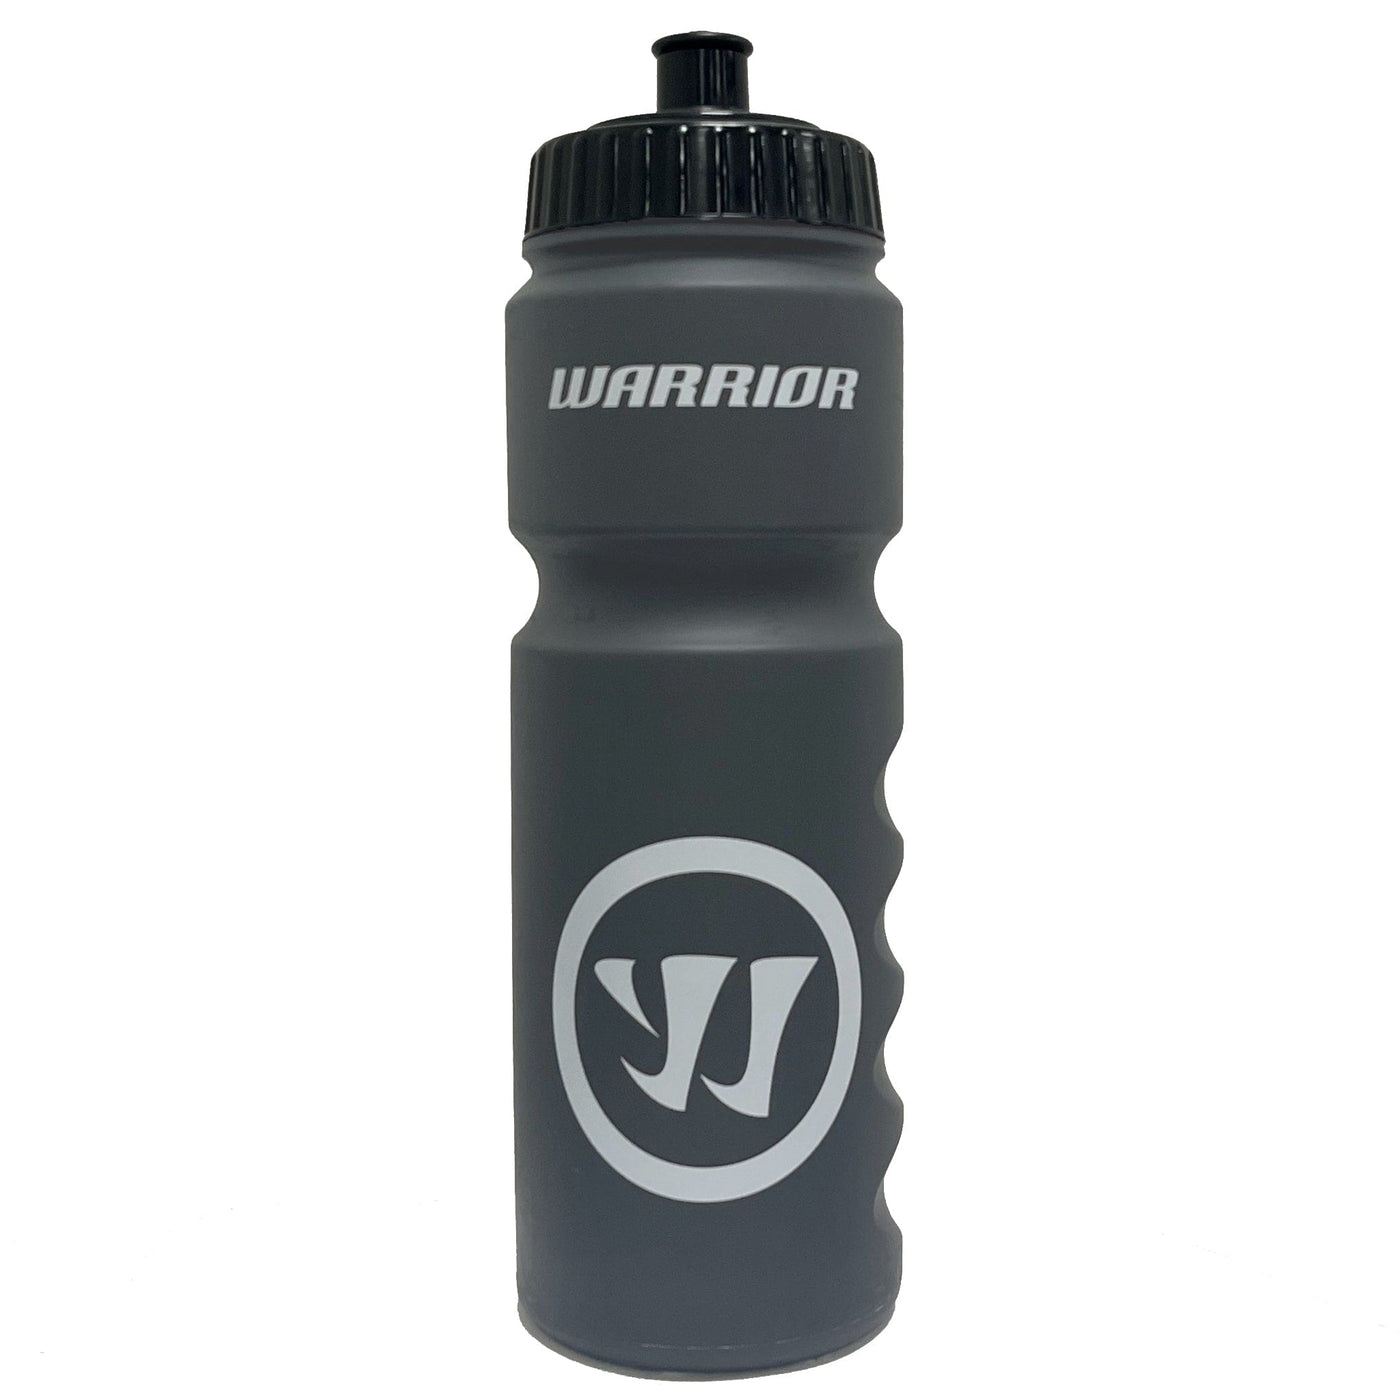 Warrior Hockey Pro Water Bottle - The Hockey Shop Source For Sports